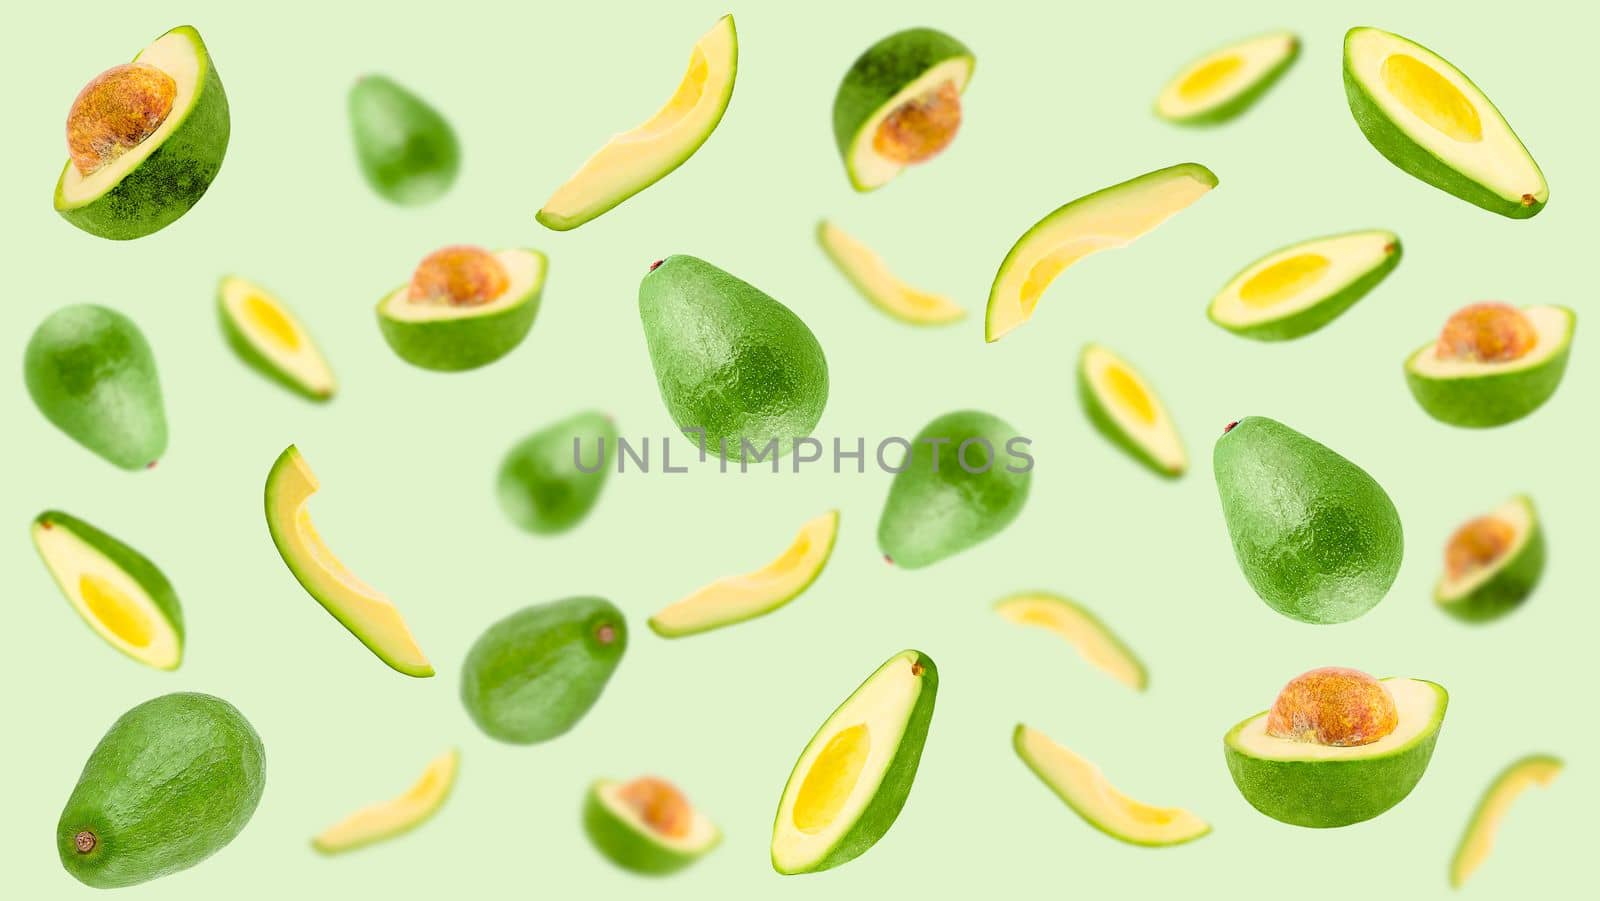 Falling avocado on pastel green surface for advertisement by Ciorba